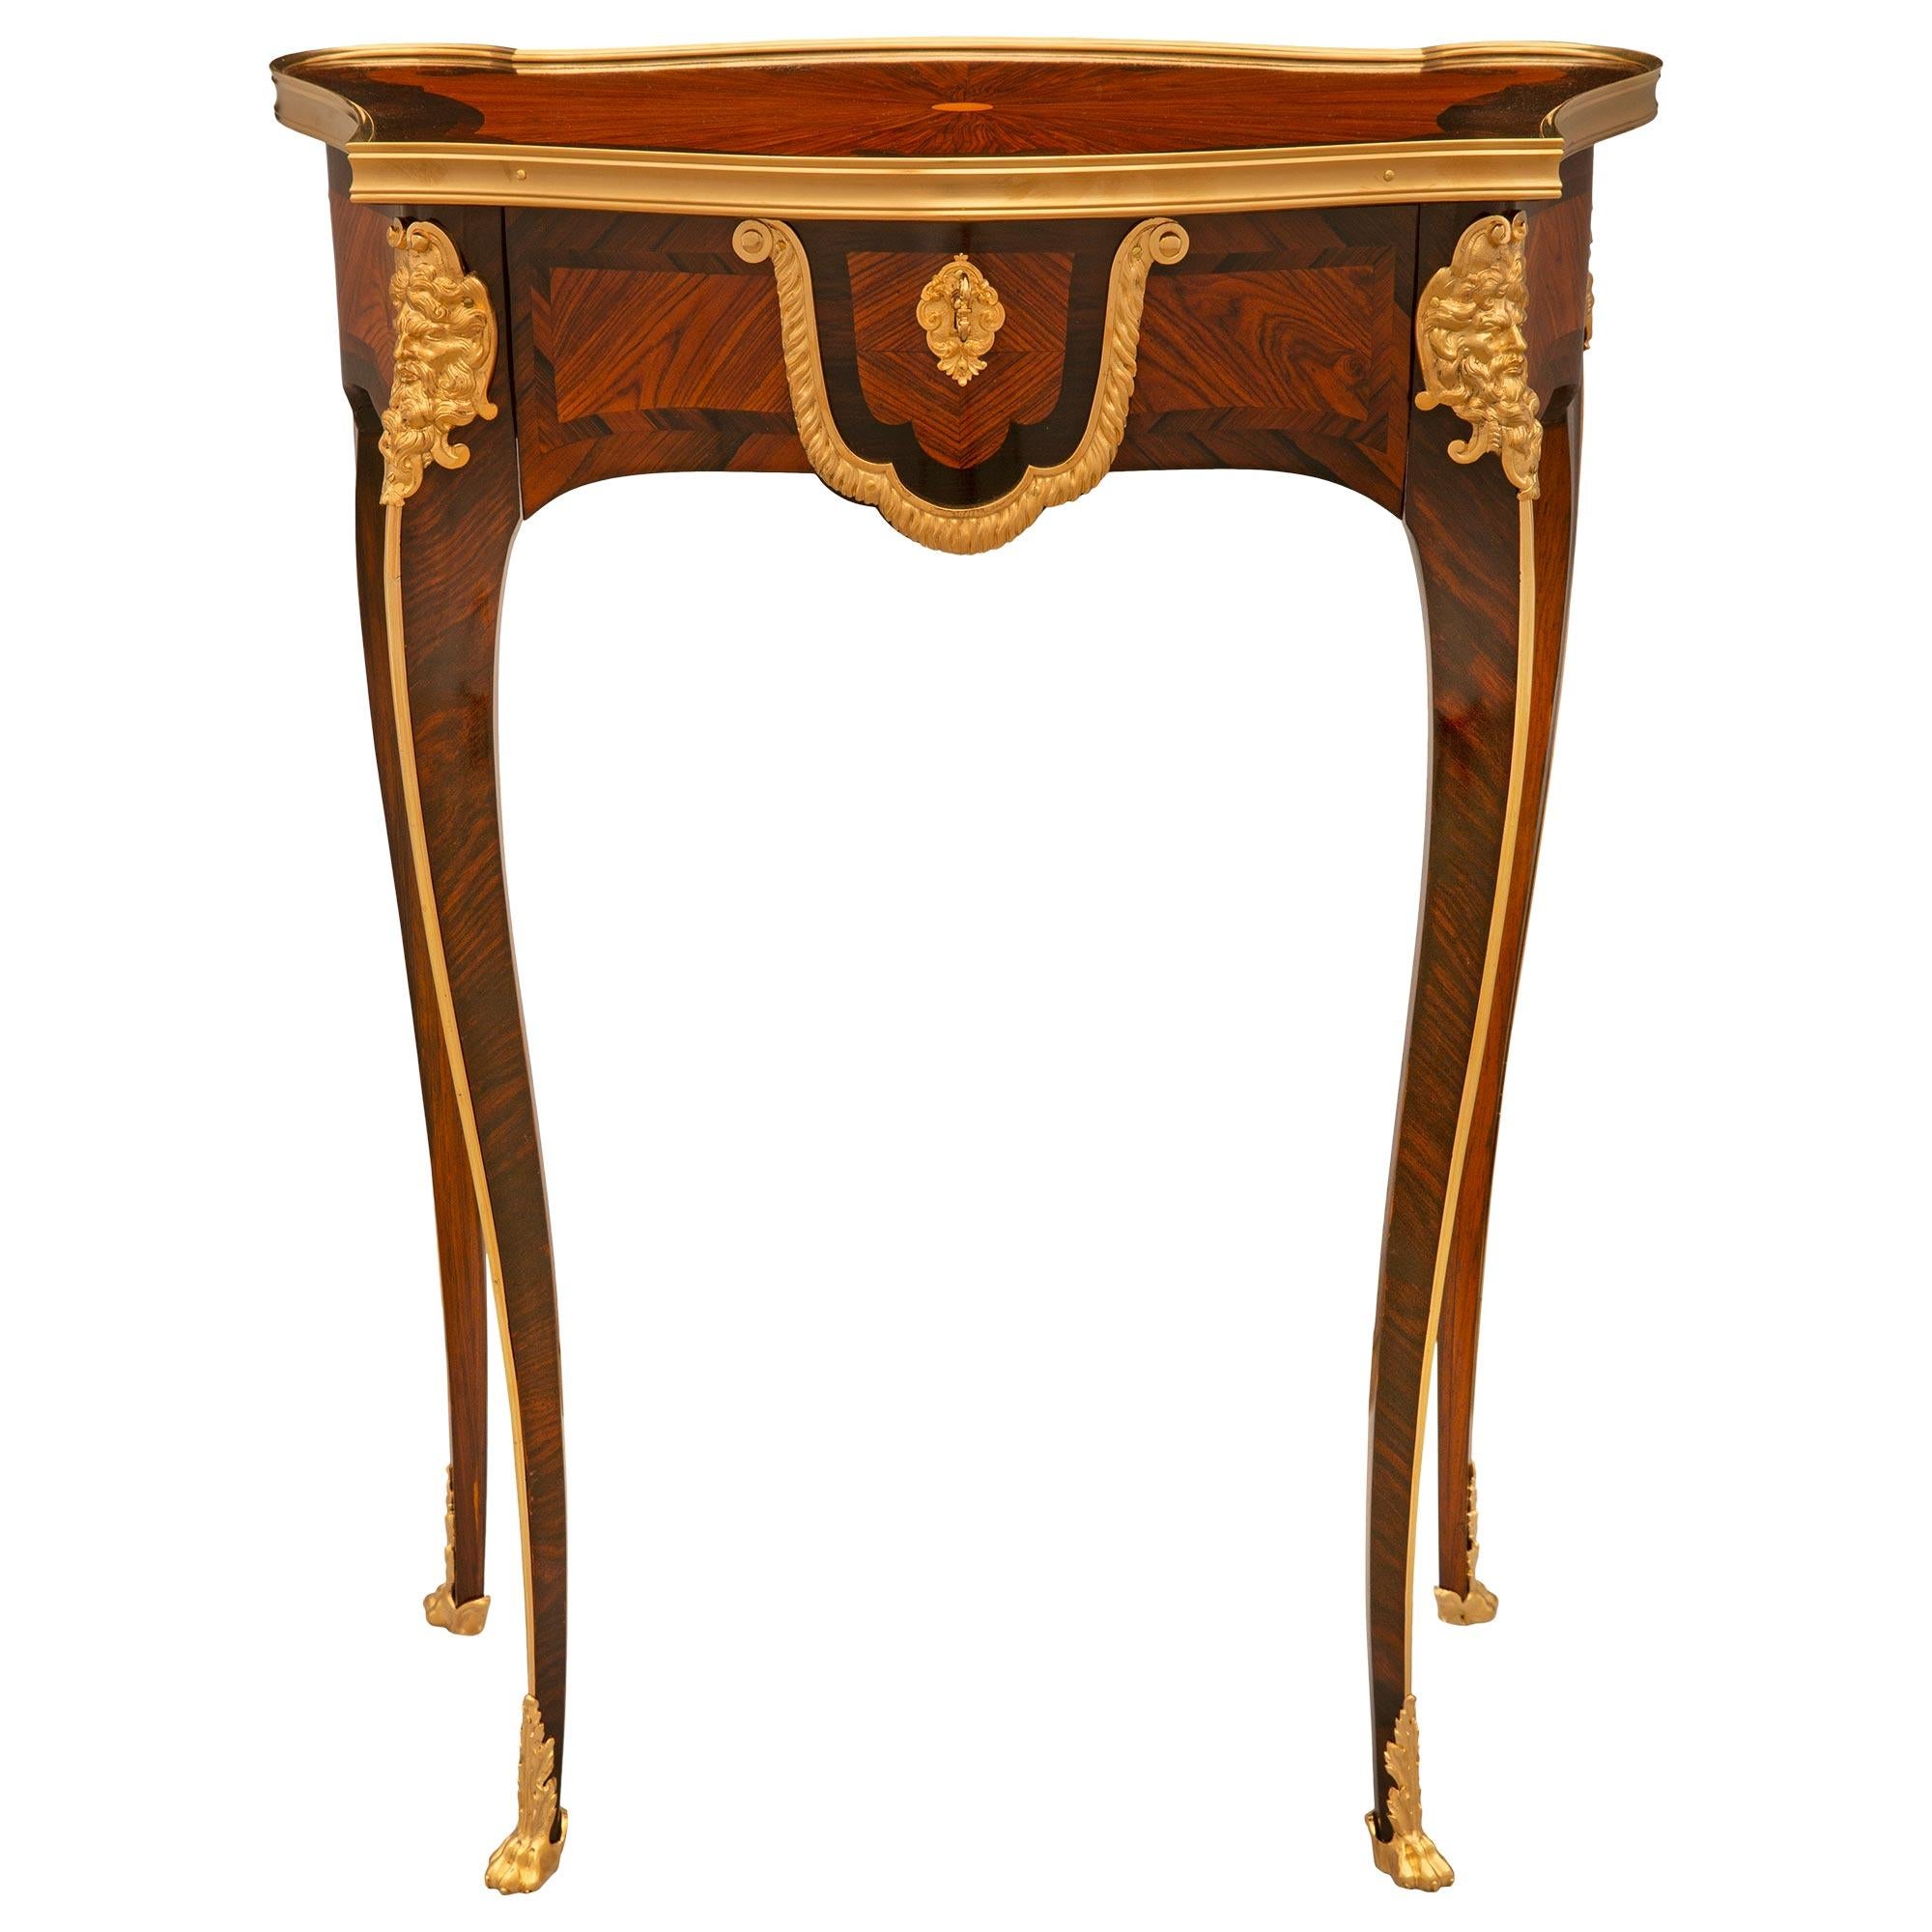 French 19th Century Belle Epoque Period Tulipwood, Kingwood & Ormolu Side Table For Sale 6